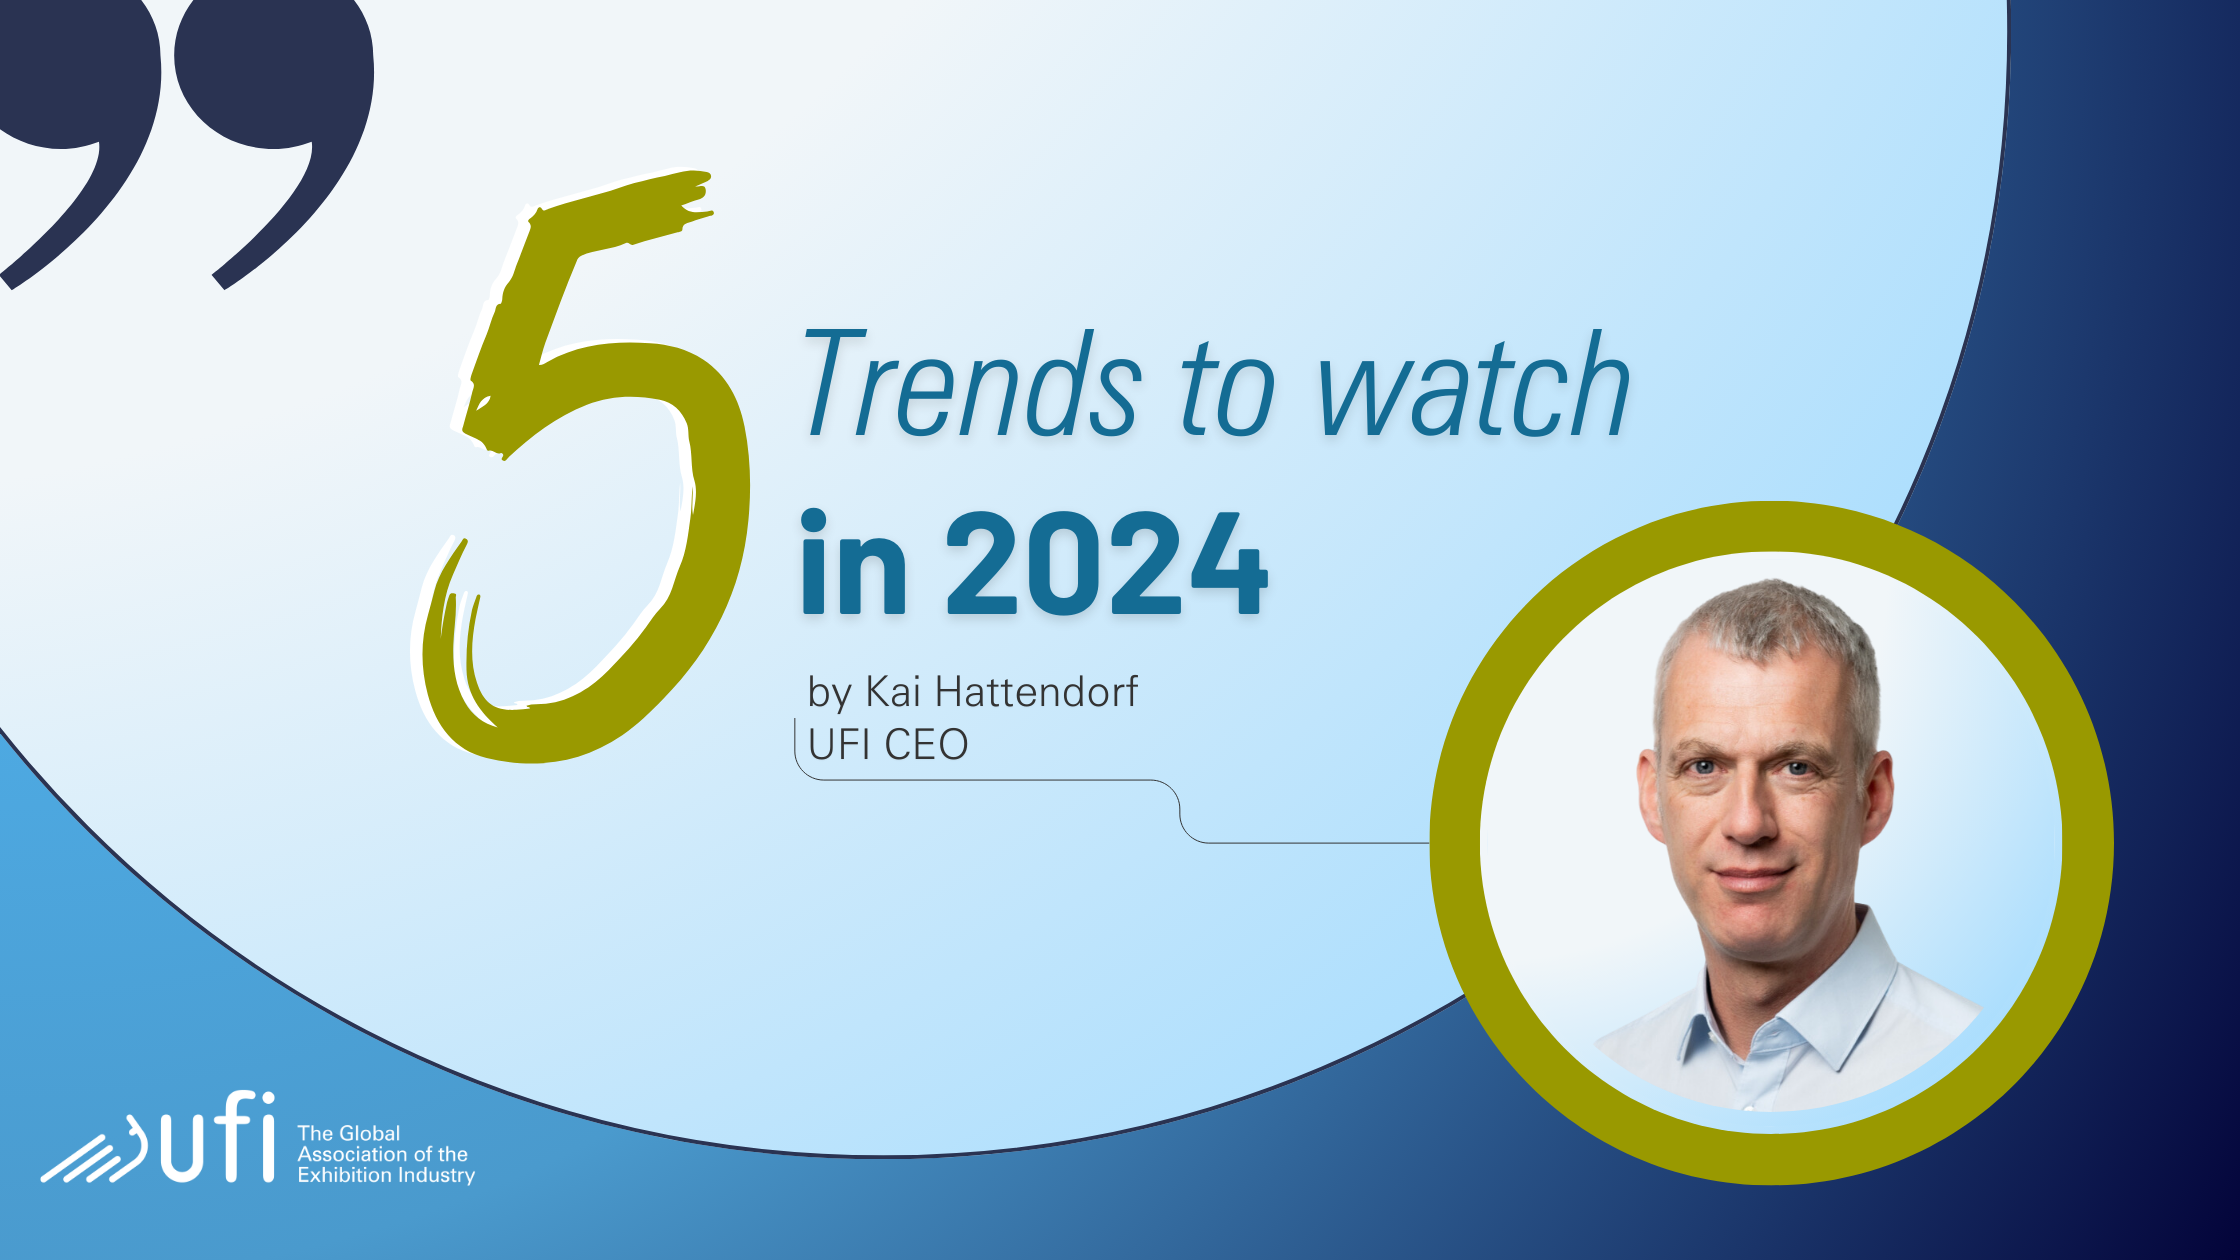 5 Trends to watch in 2024